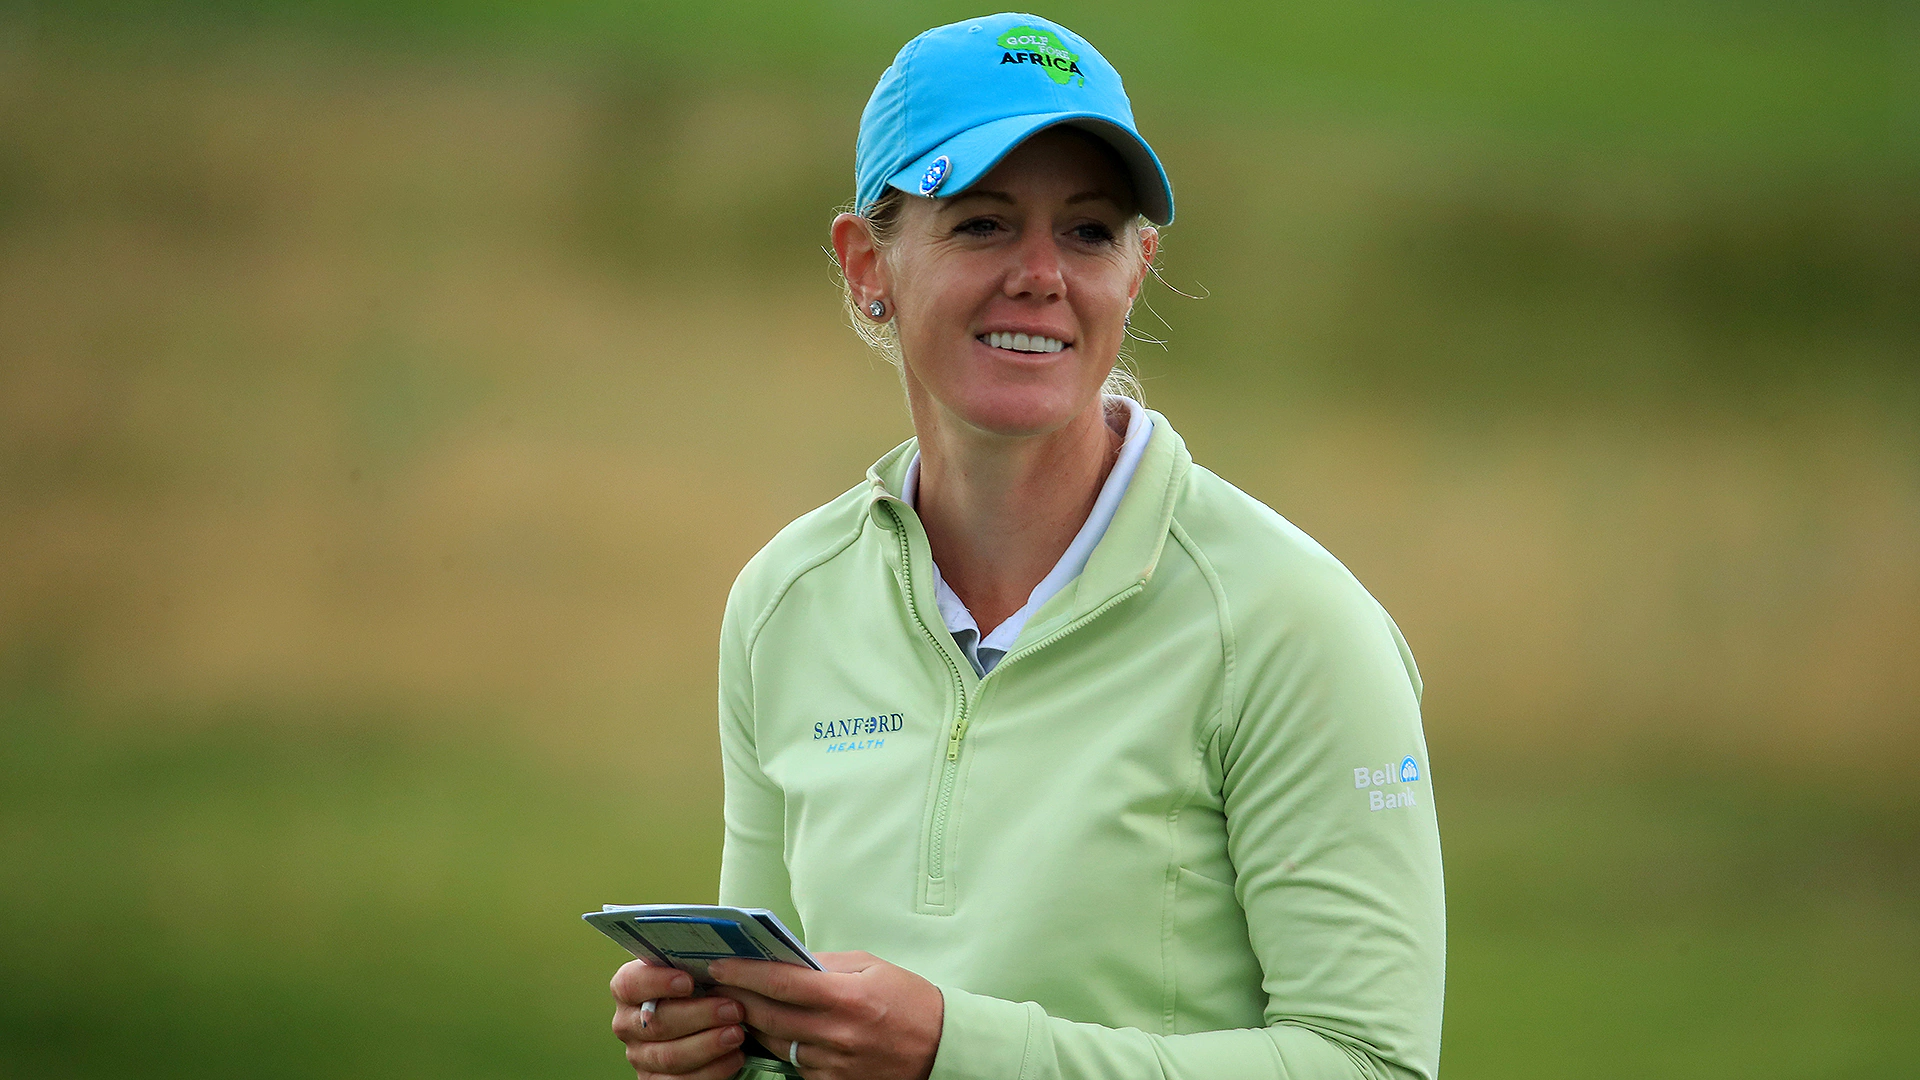 Amy Olson (67) carves difficult Royal Troon in blustery conditions to take lead